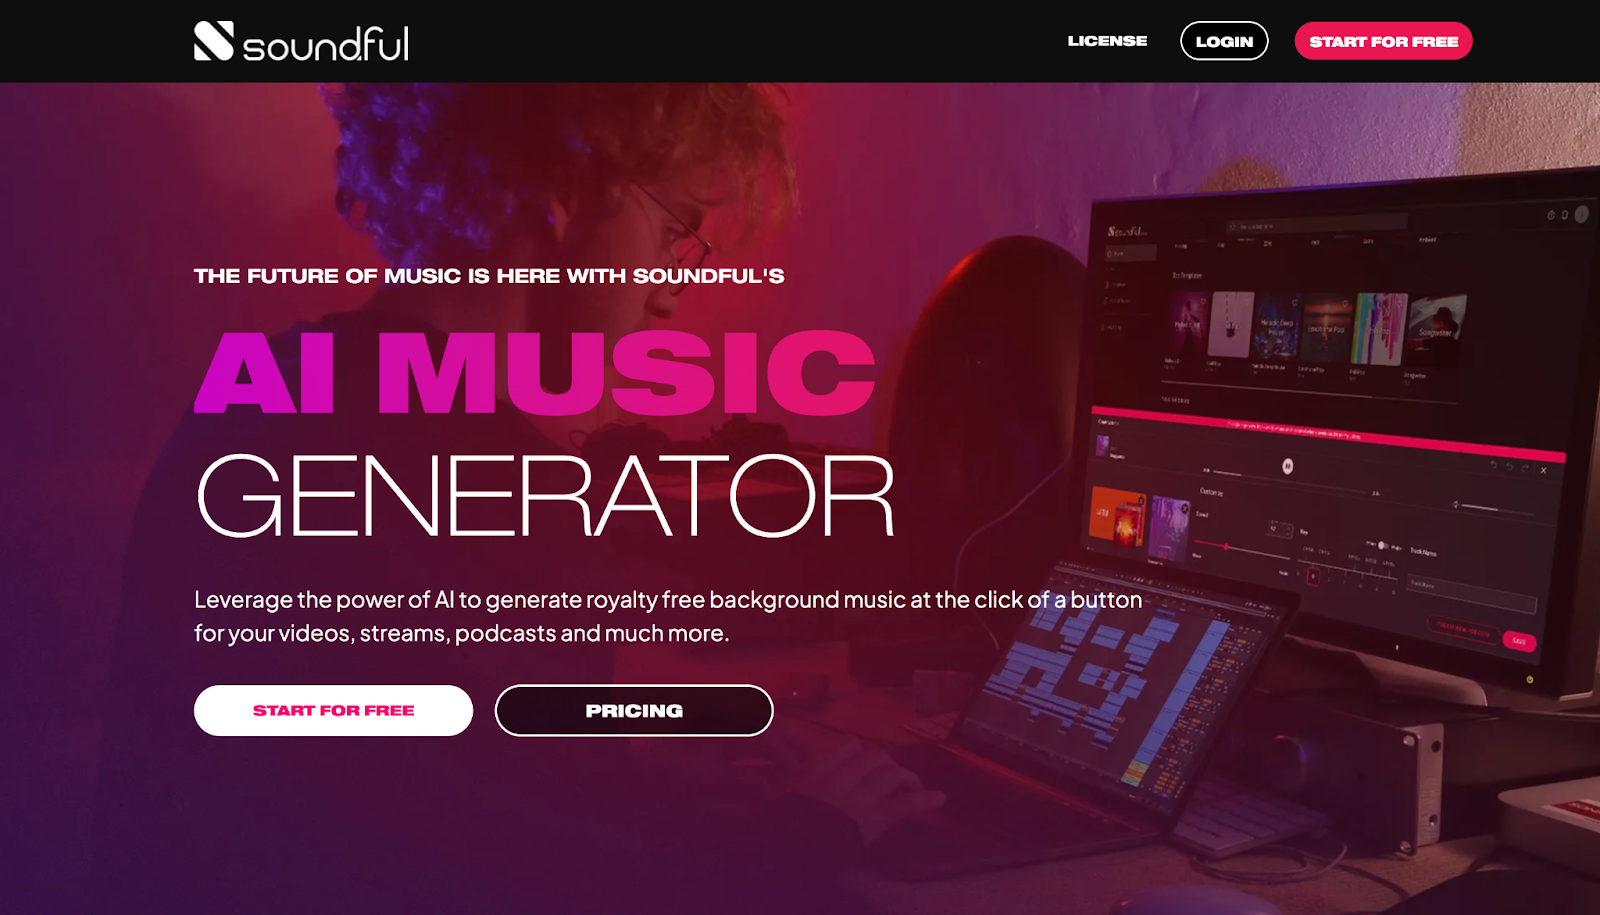 Soundful is one of the best AI music generation tools